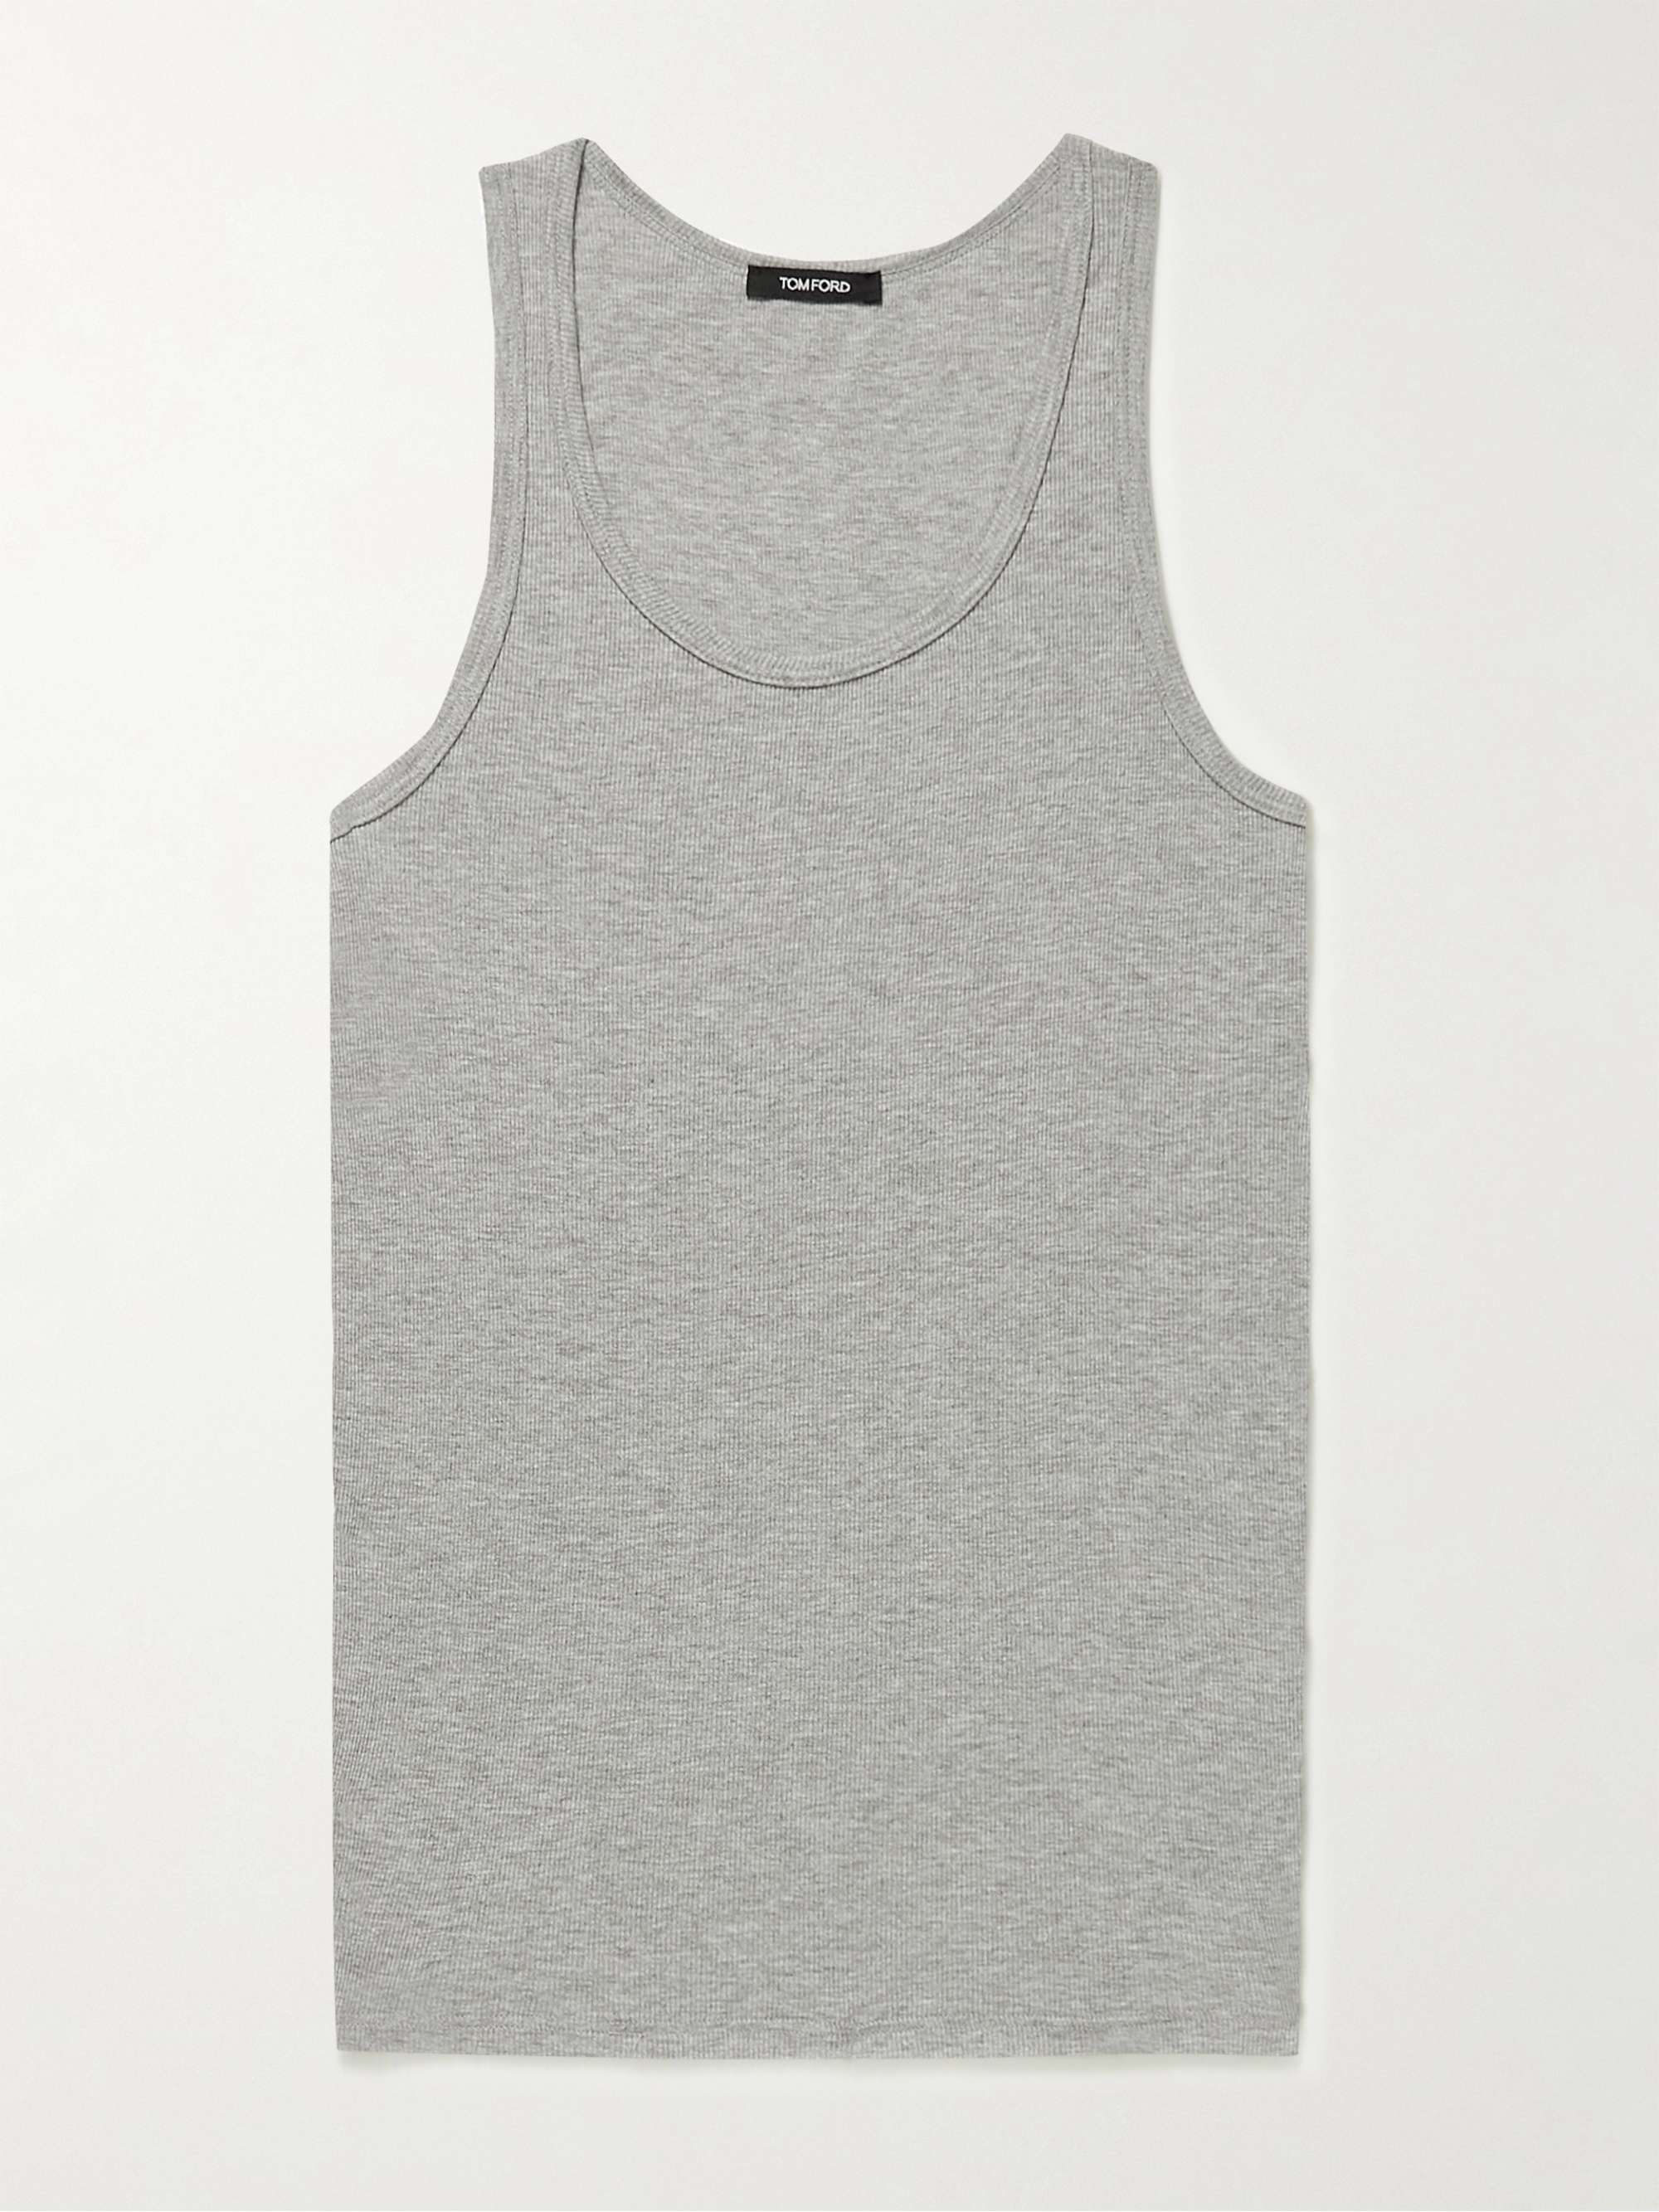 TOM FORD Ribbed Cotton and Modal-Blend Tank Top | MR PORTER